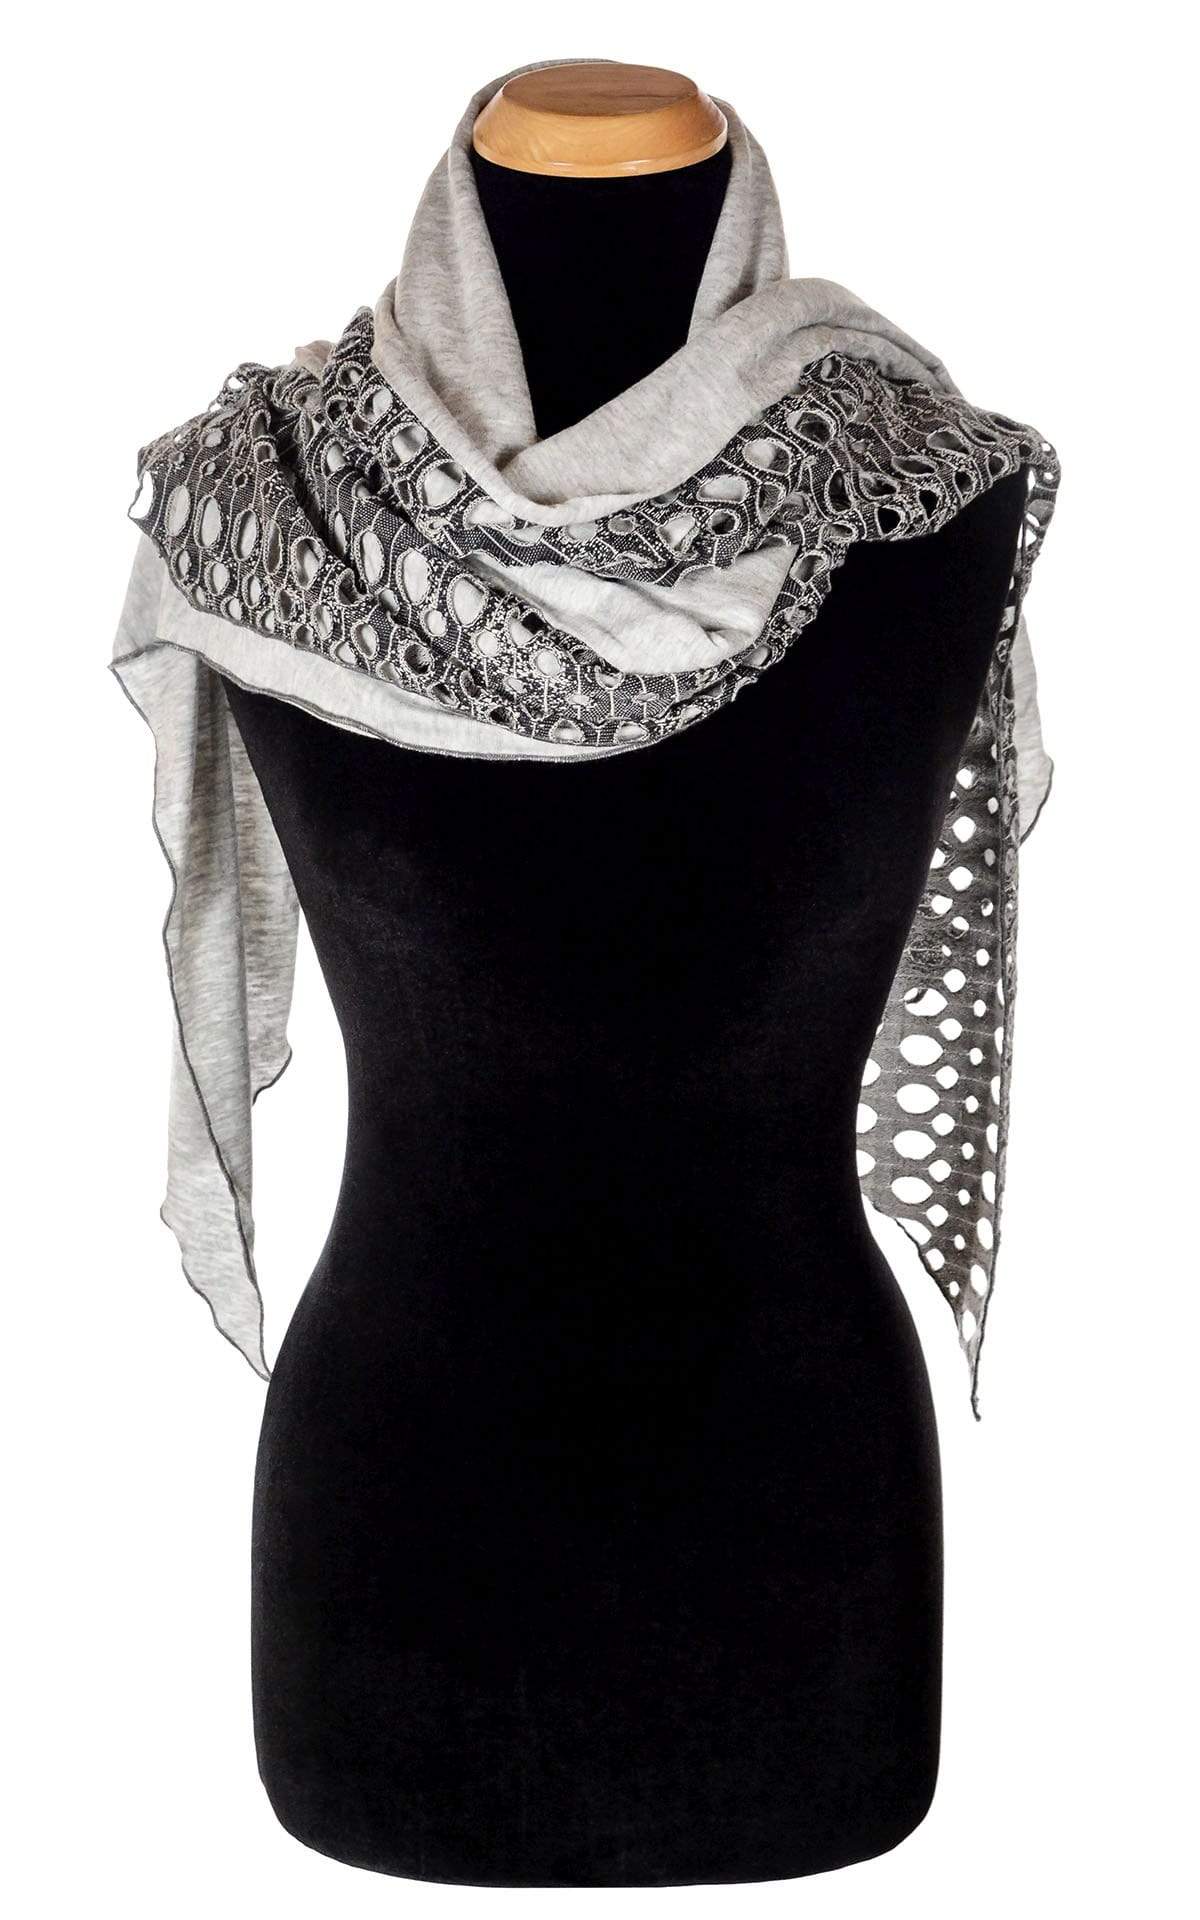 Ladies Two-Tone Handkerchief Scarf on Mannequin | Lunar Landing, a black and neutral knit with curled edges surrounding holes, paired with a light-weight Silver Gray Jersey Knit | Handmade in Seattle WA | Pandemonium Millinery